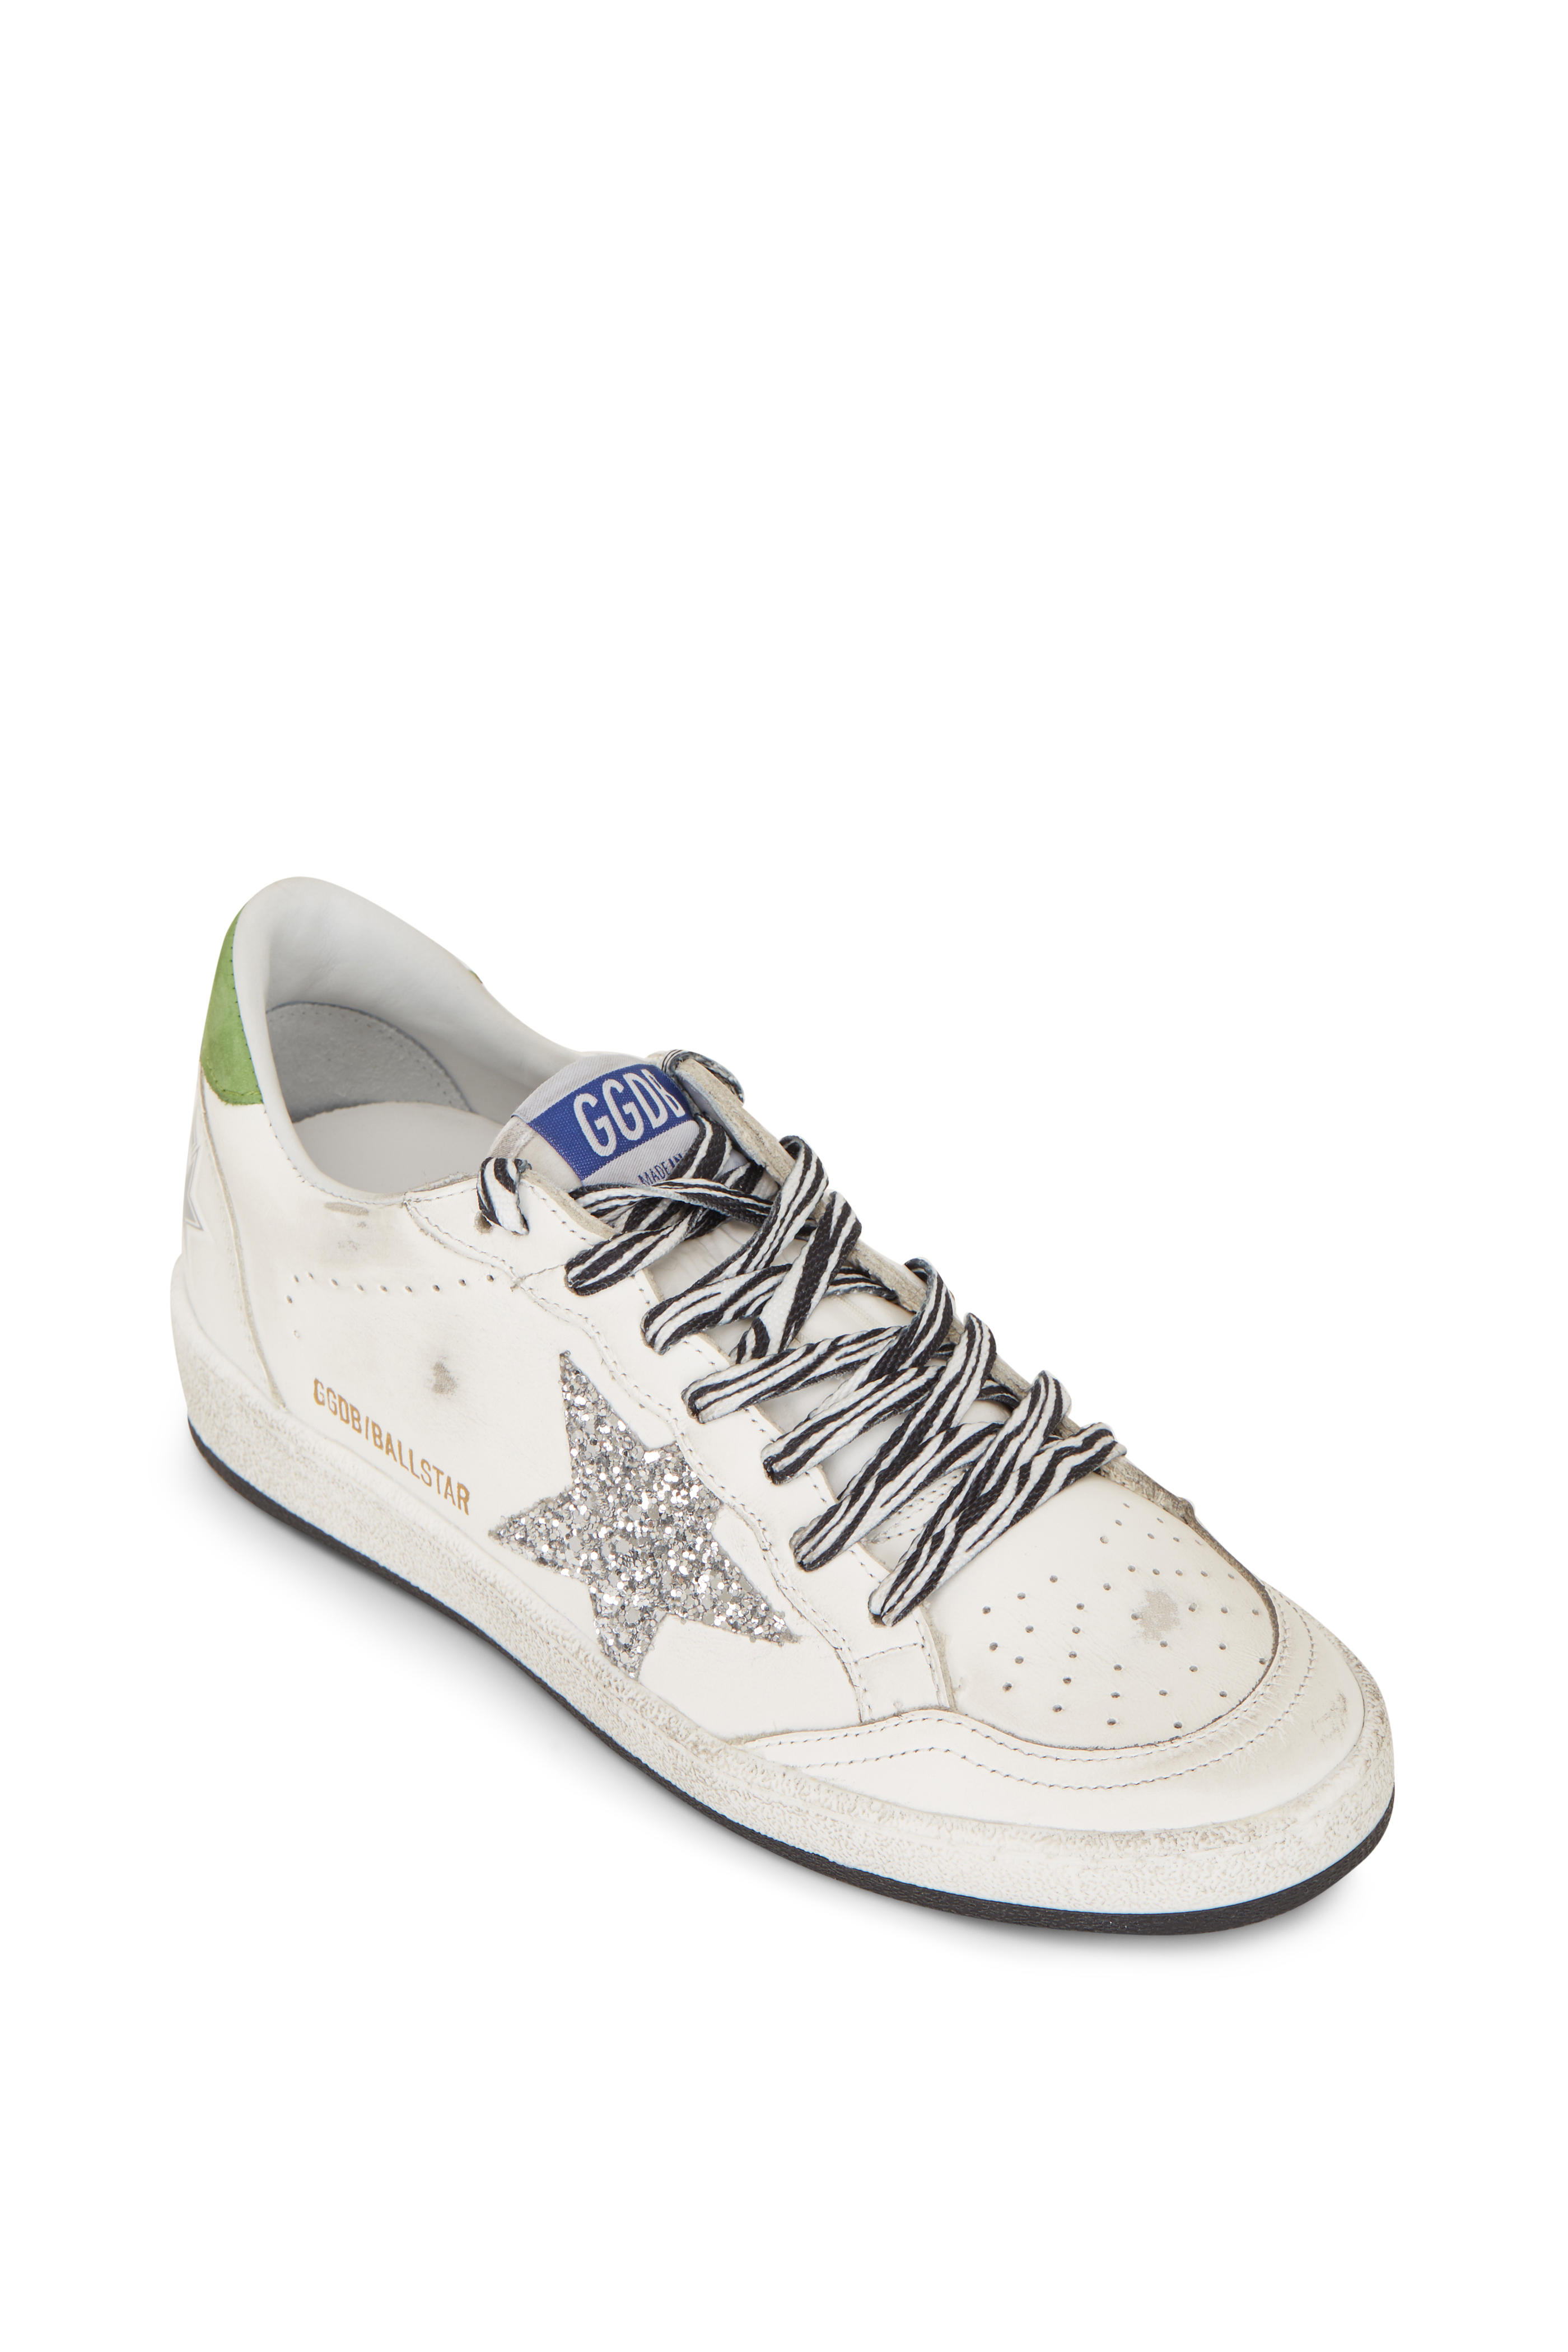 golden goose all white sneakers